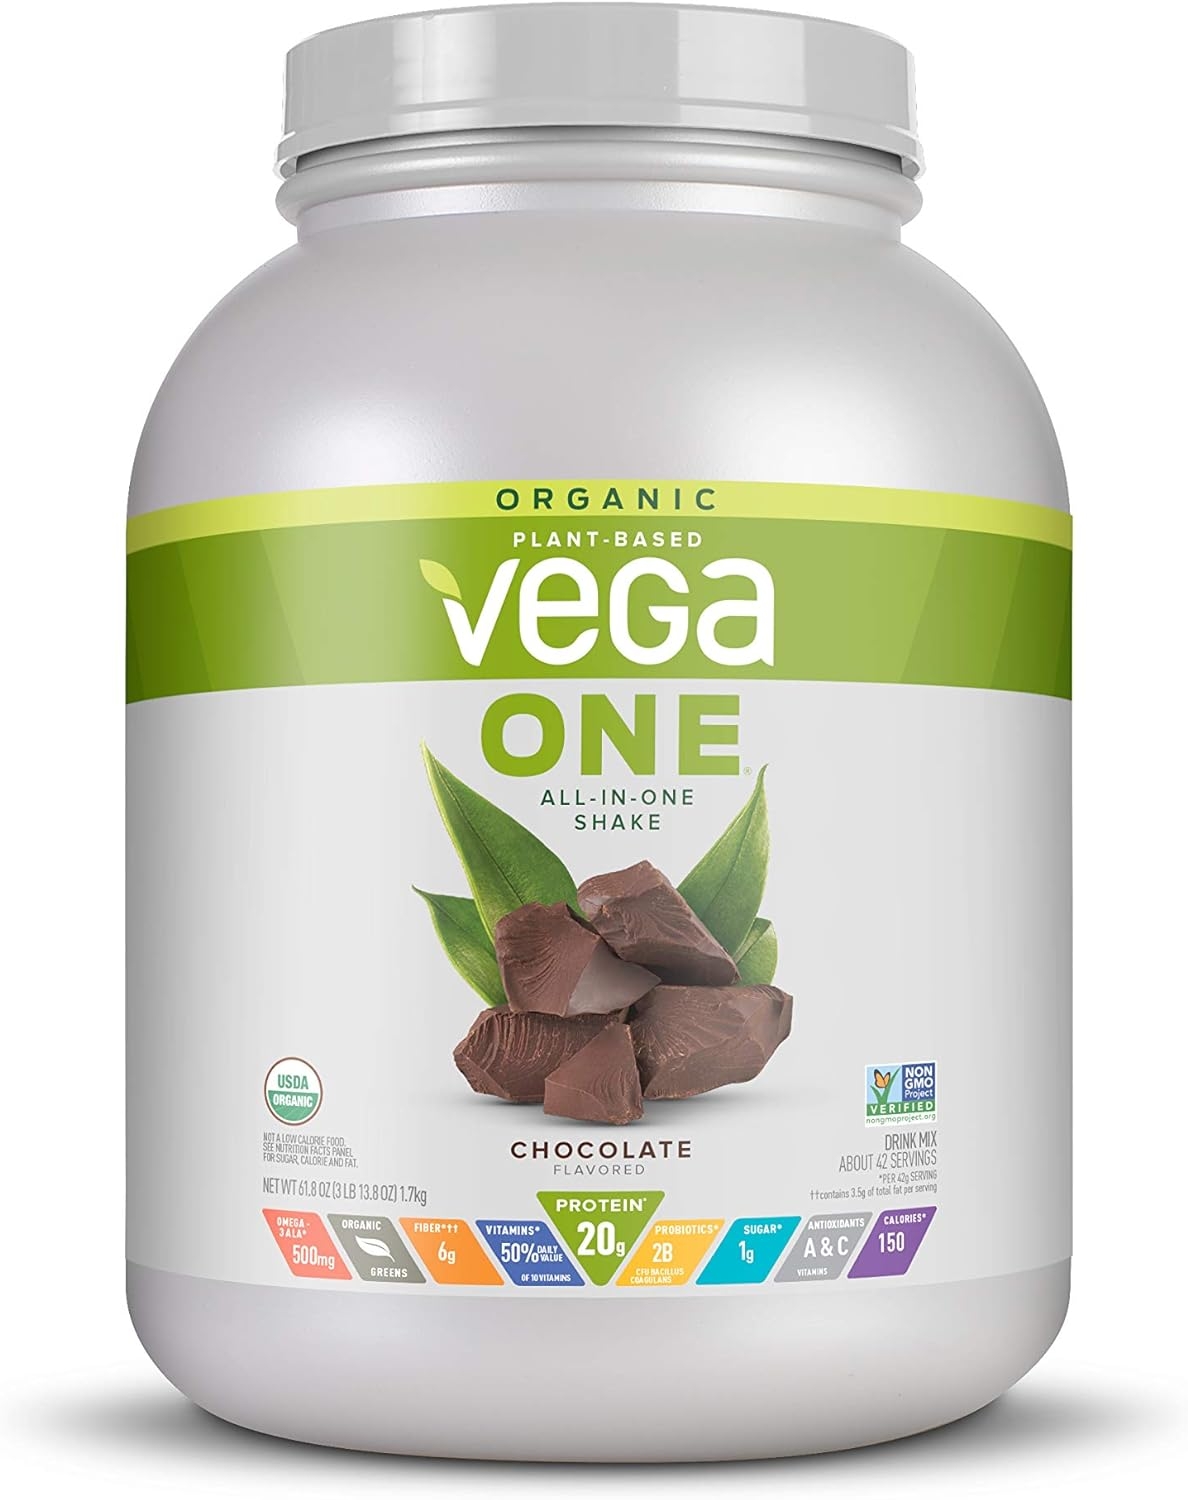 Vega One Organic Meal Replacement Plant Based Protein Powder, Chocolate - Vegan, Vegetarian, Gluten Free, Dairy Free with Vitamins, Minerals, Antioxidants and Probiotics (42 Servings, 3.86 lbs)